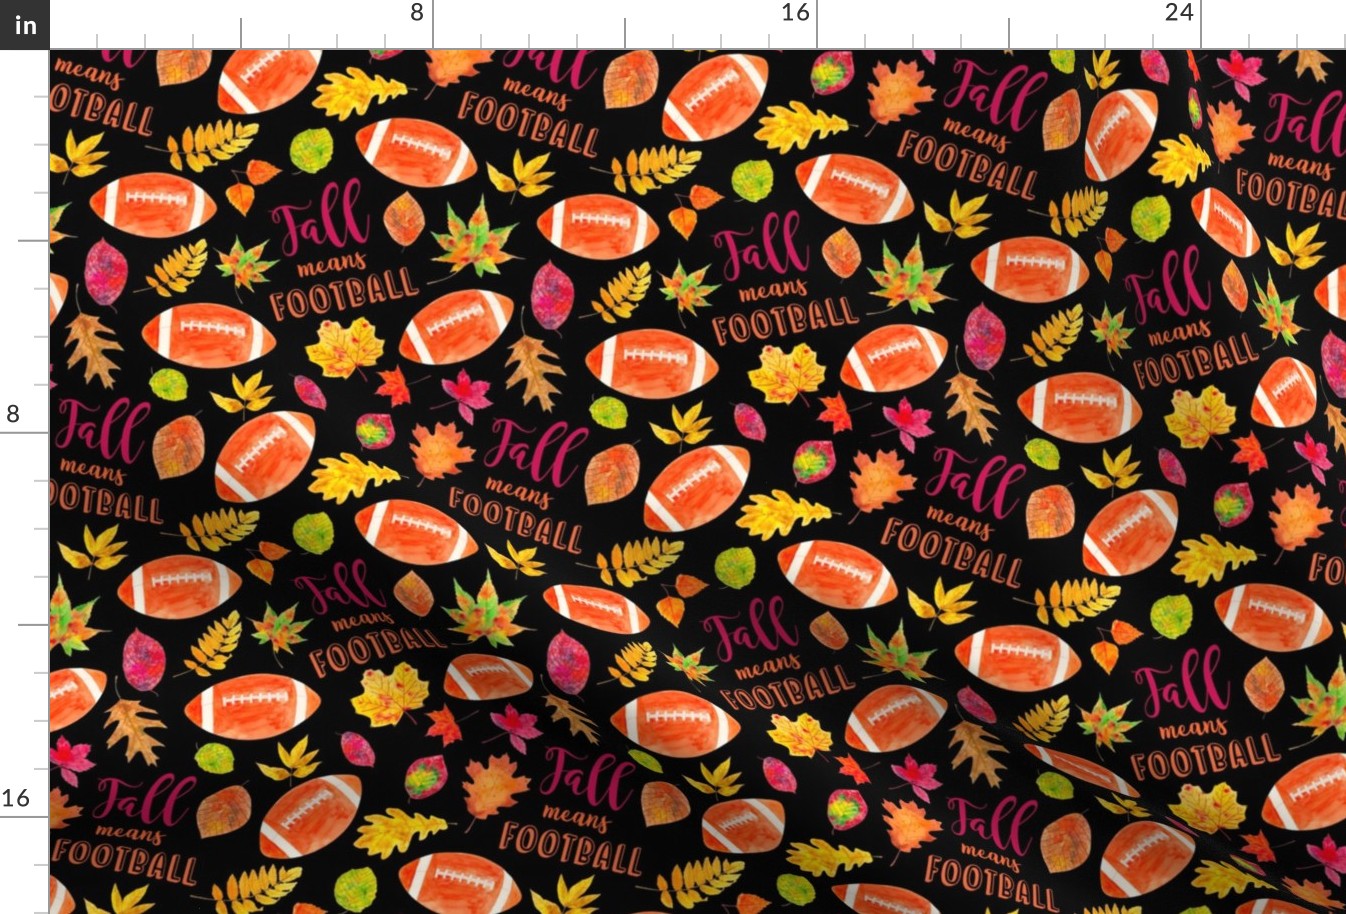 Large Scale Fall means Football with Watercolor Autumn Leaves